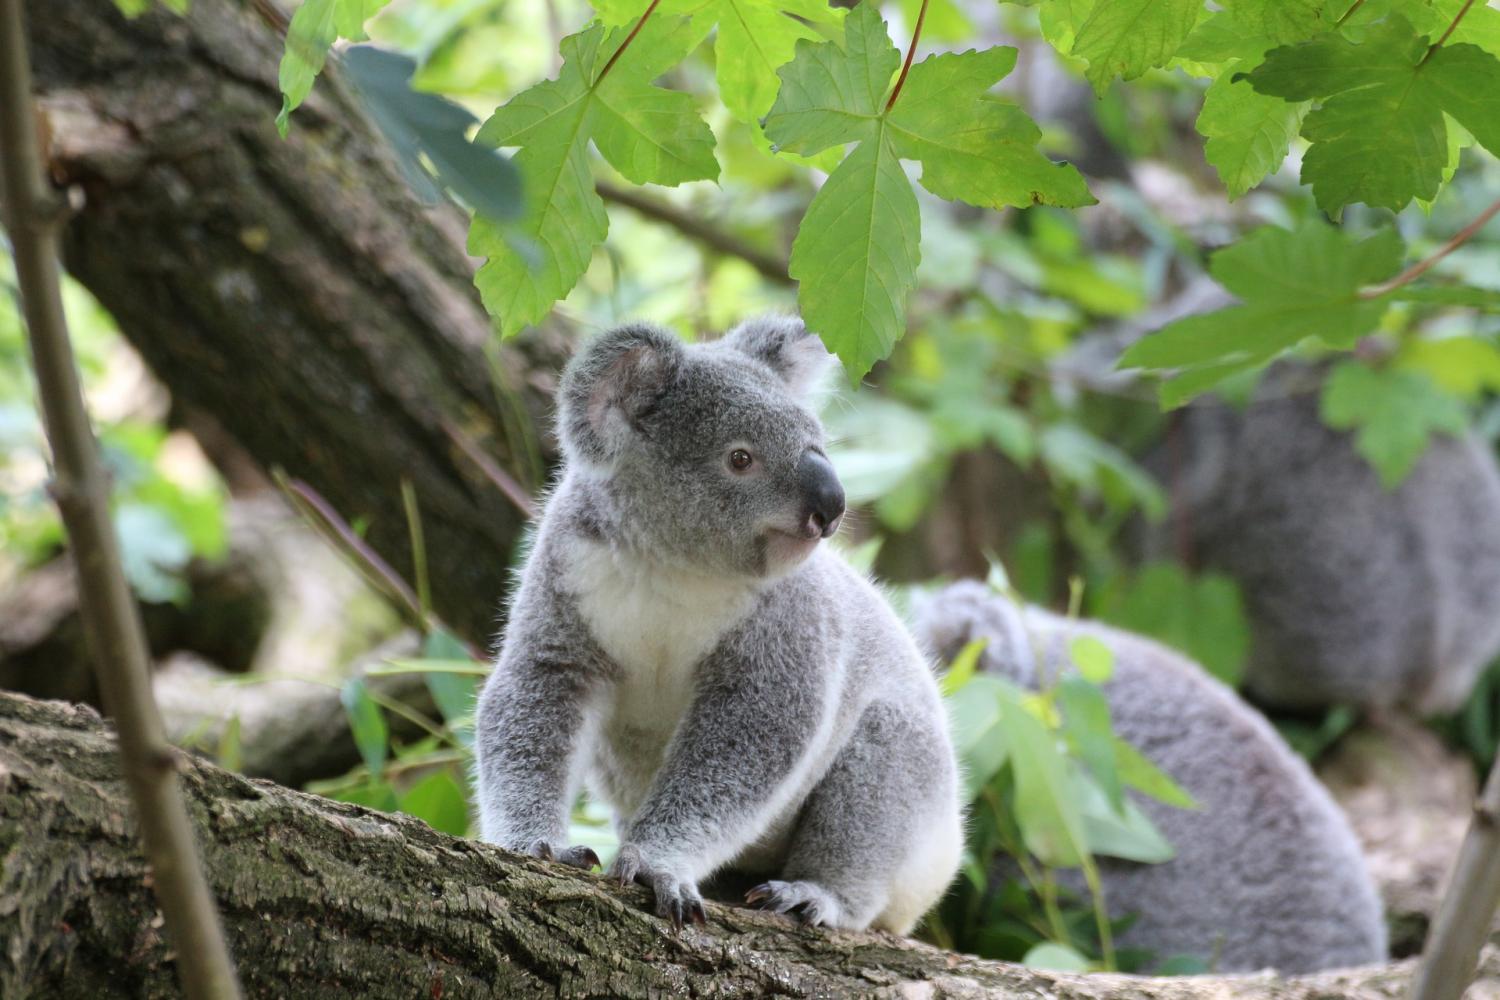 Koalas use their noses to find friends and avoid enemies